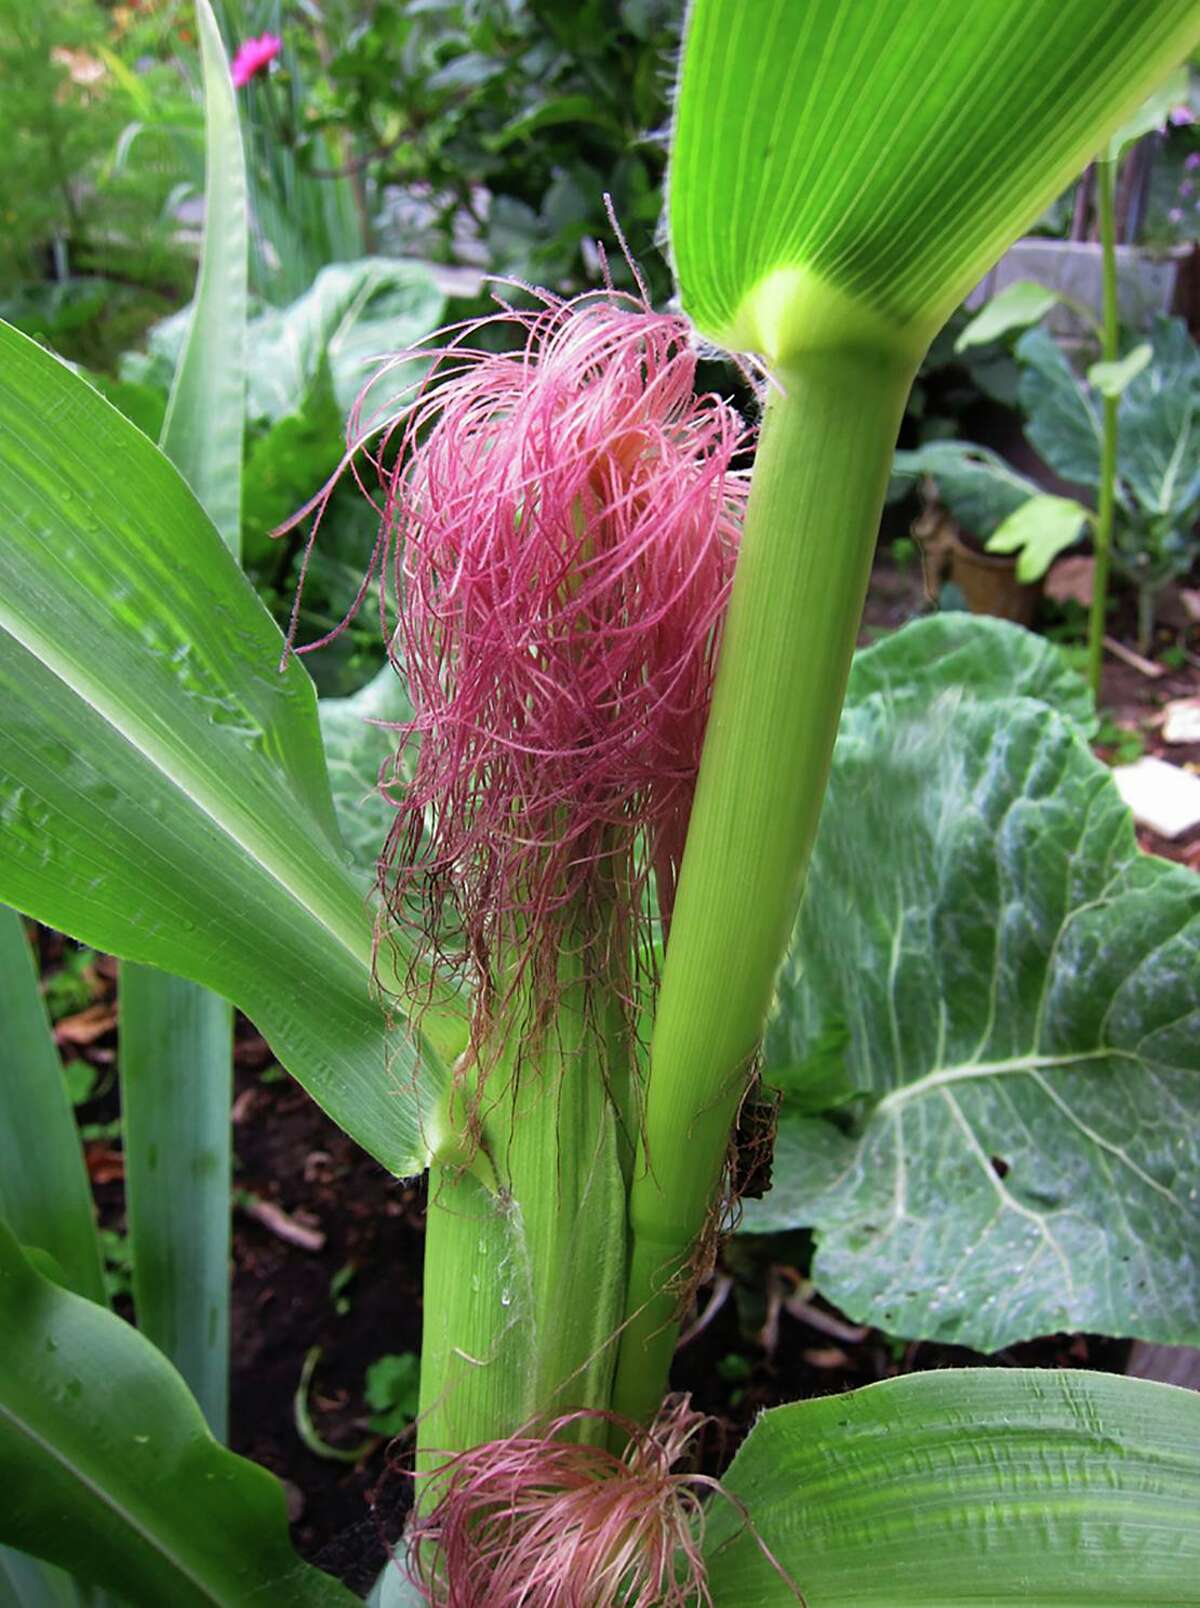 When you see the lovely, sometimes pink silk, sweet corn is soon to follow.